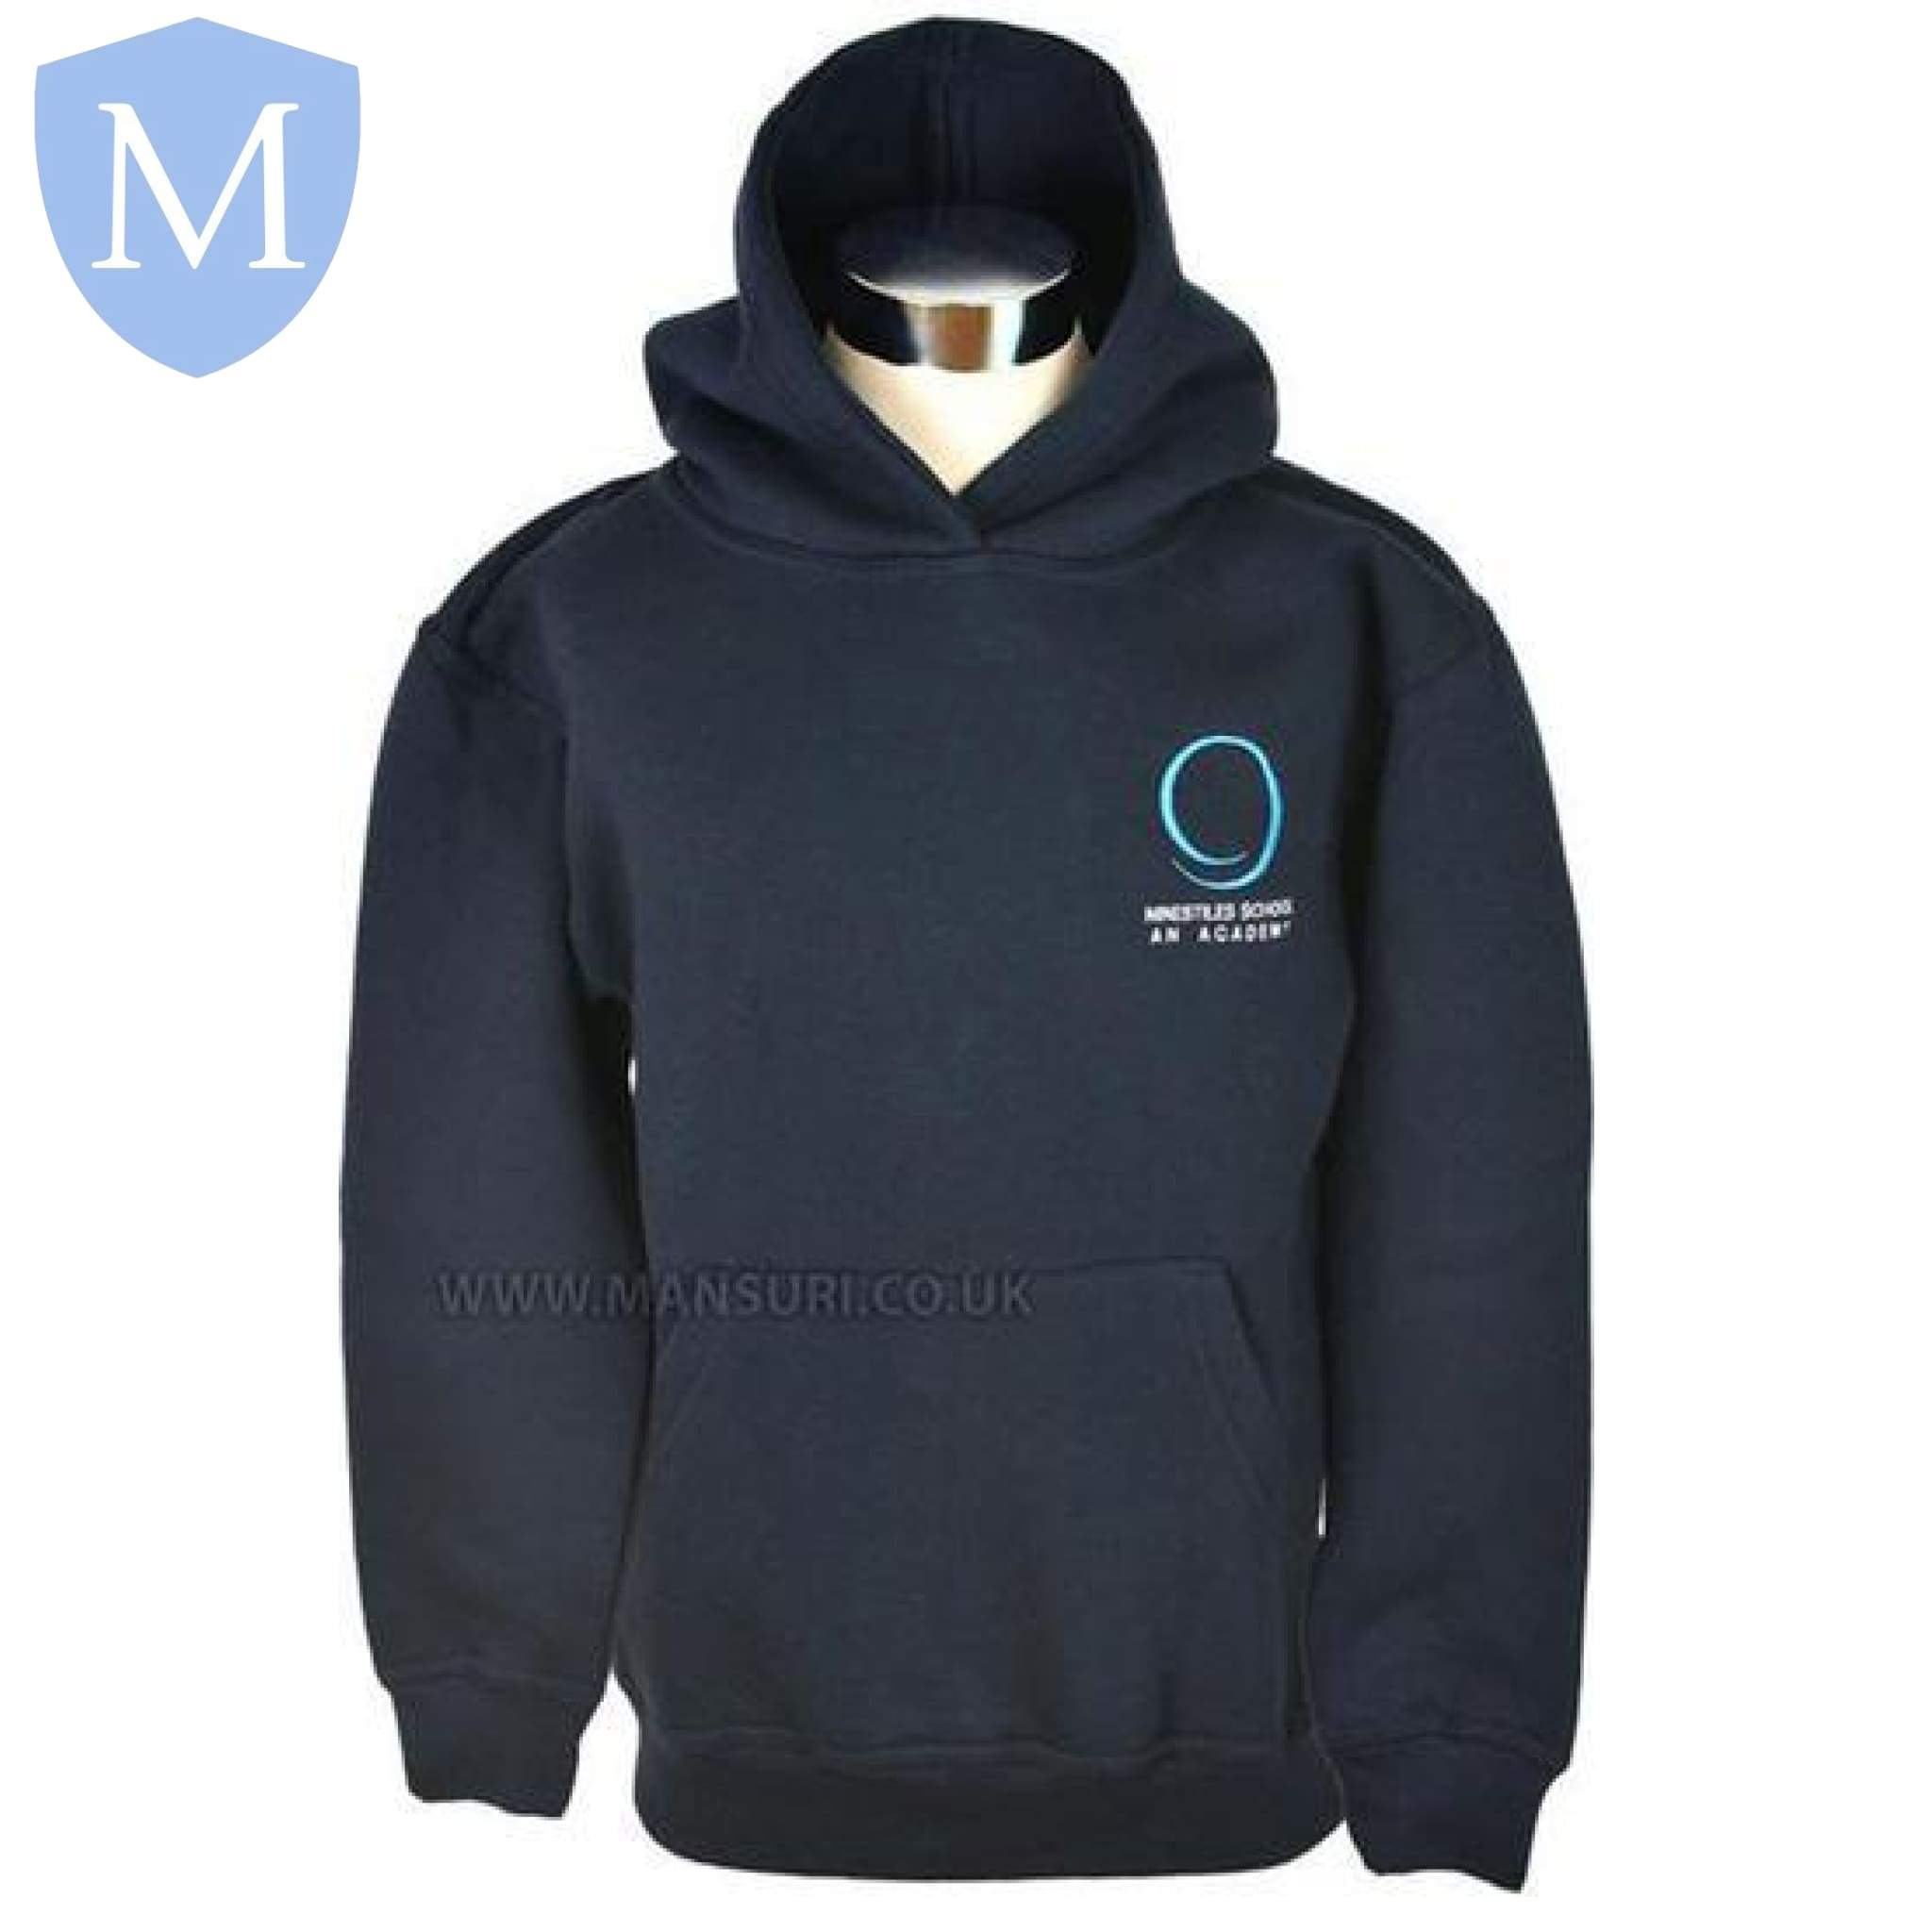 Ninestiles An Hooded Top 2XL,11-12 Years,13 Years,9-10 Years,Large,Medium,Small,X-Large